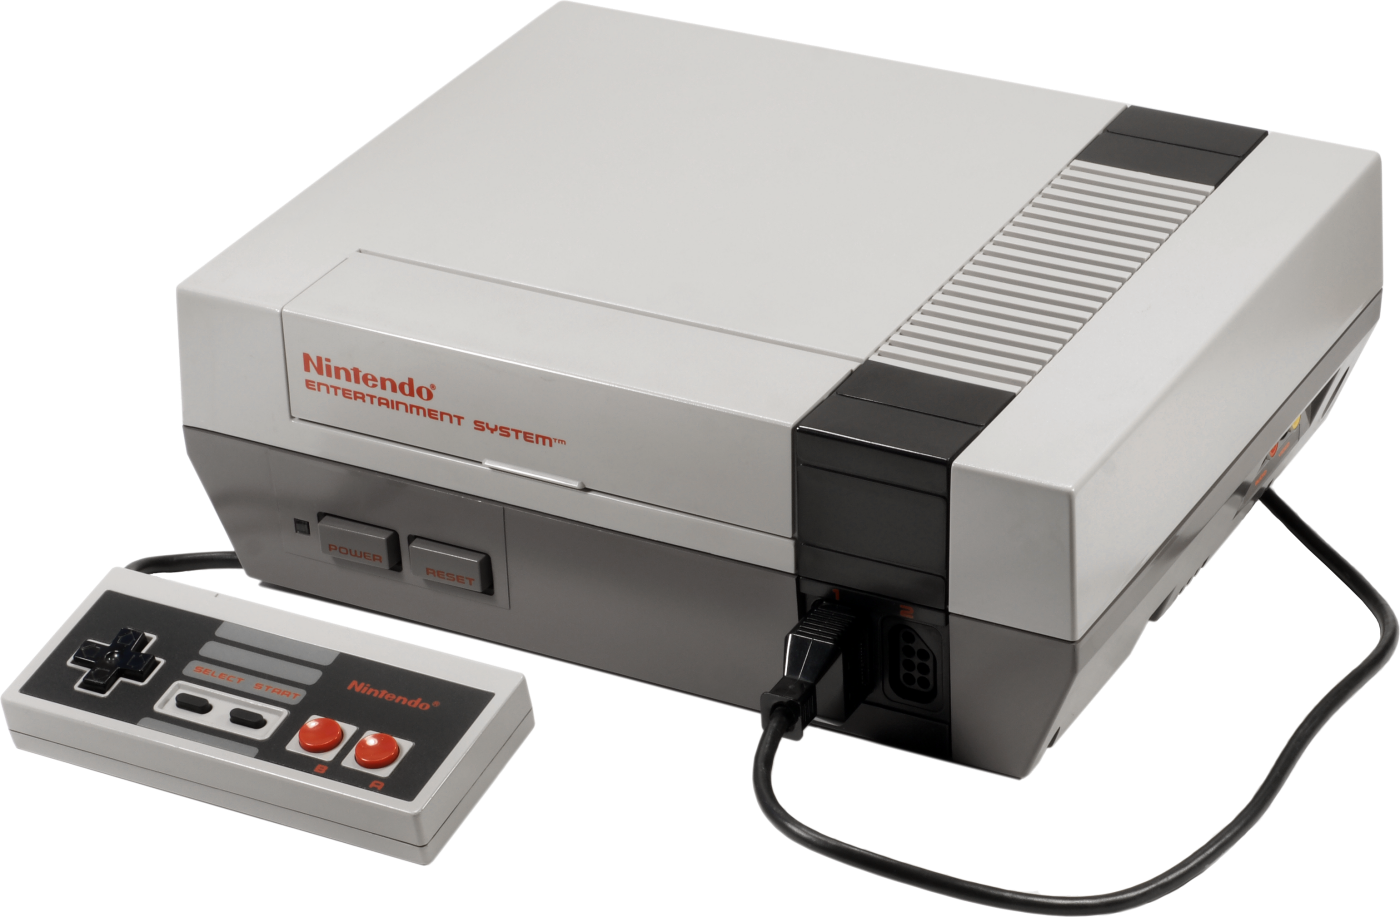 https://ia801806.us.archive.org/3/items/nes-romset-ultra-us/Nintendo_Entertainment_System_Model.png